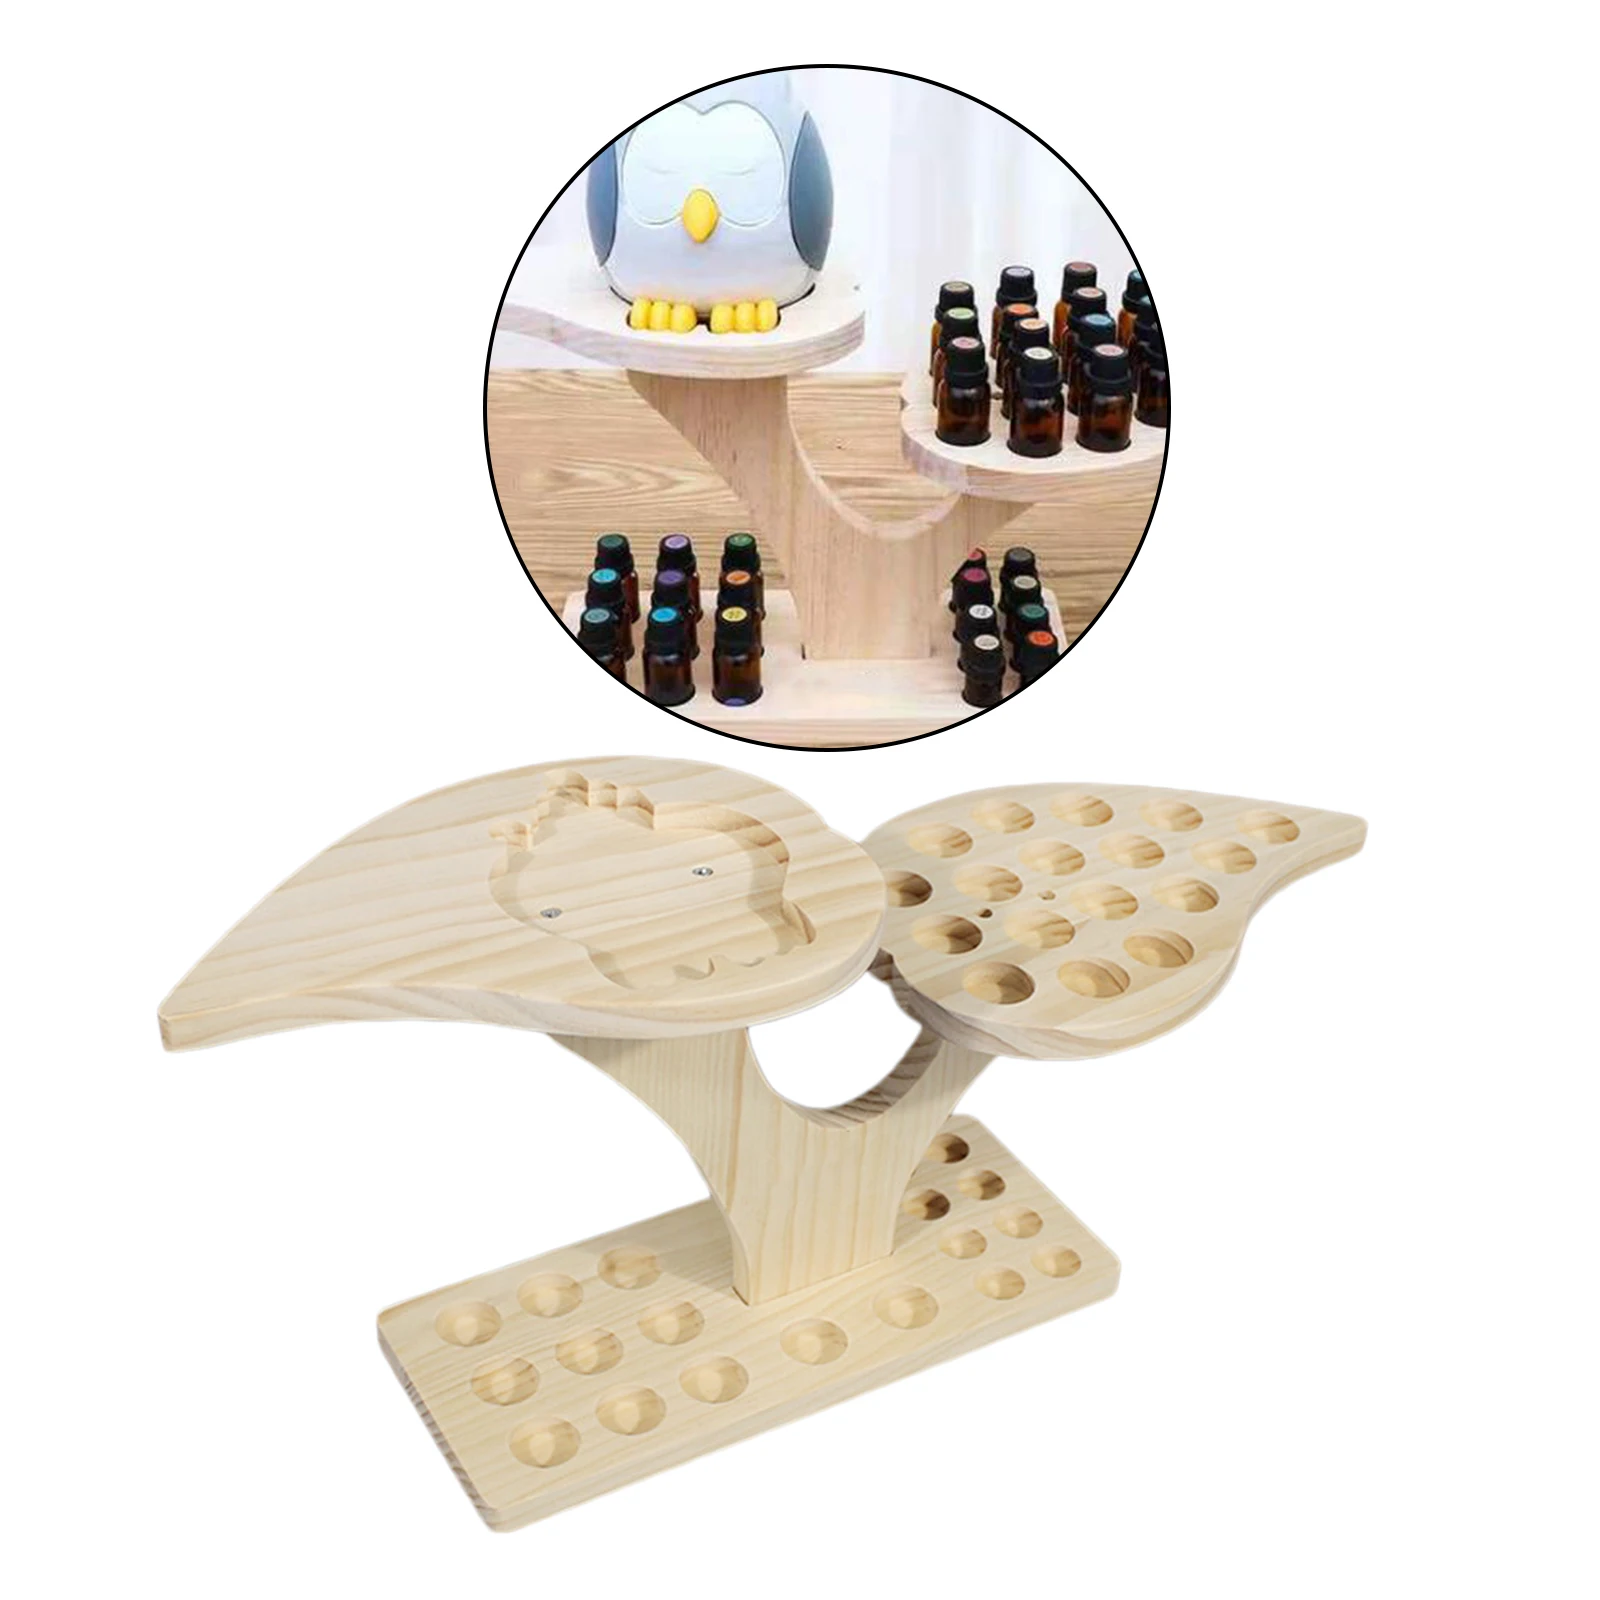 36 Slots Wooden Essential Oils Stand Diffuser Holder Carousel Box Elegant